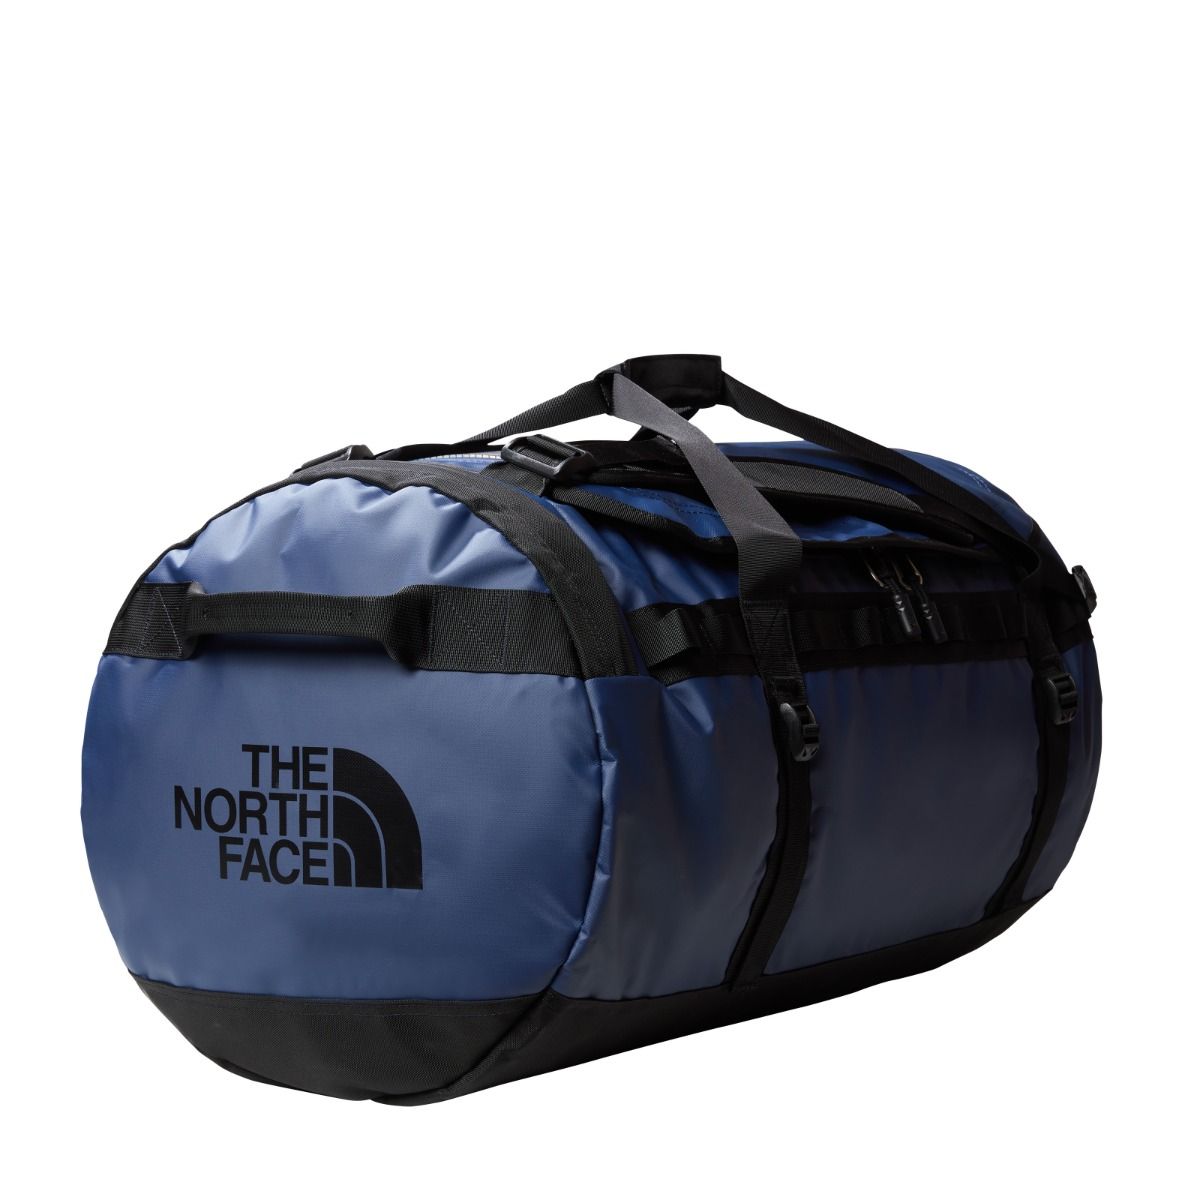 The North Face - BASE CAMP DUFFEL LARGE 95L